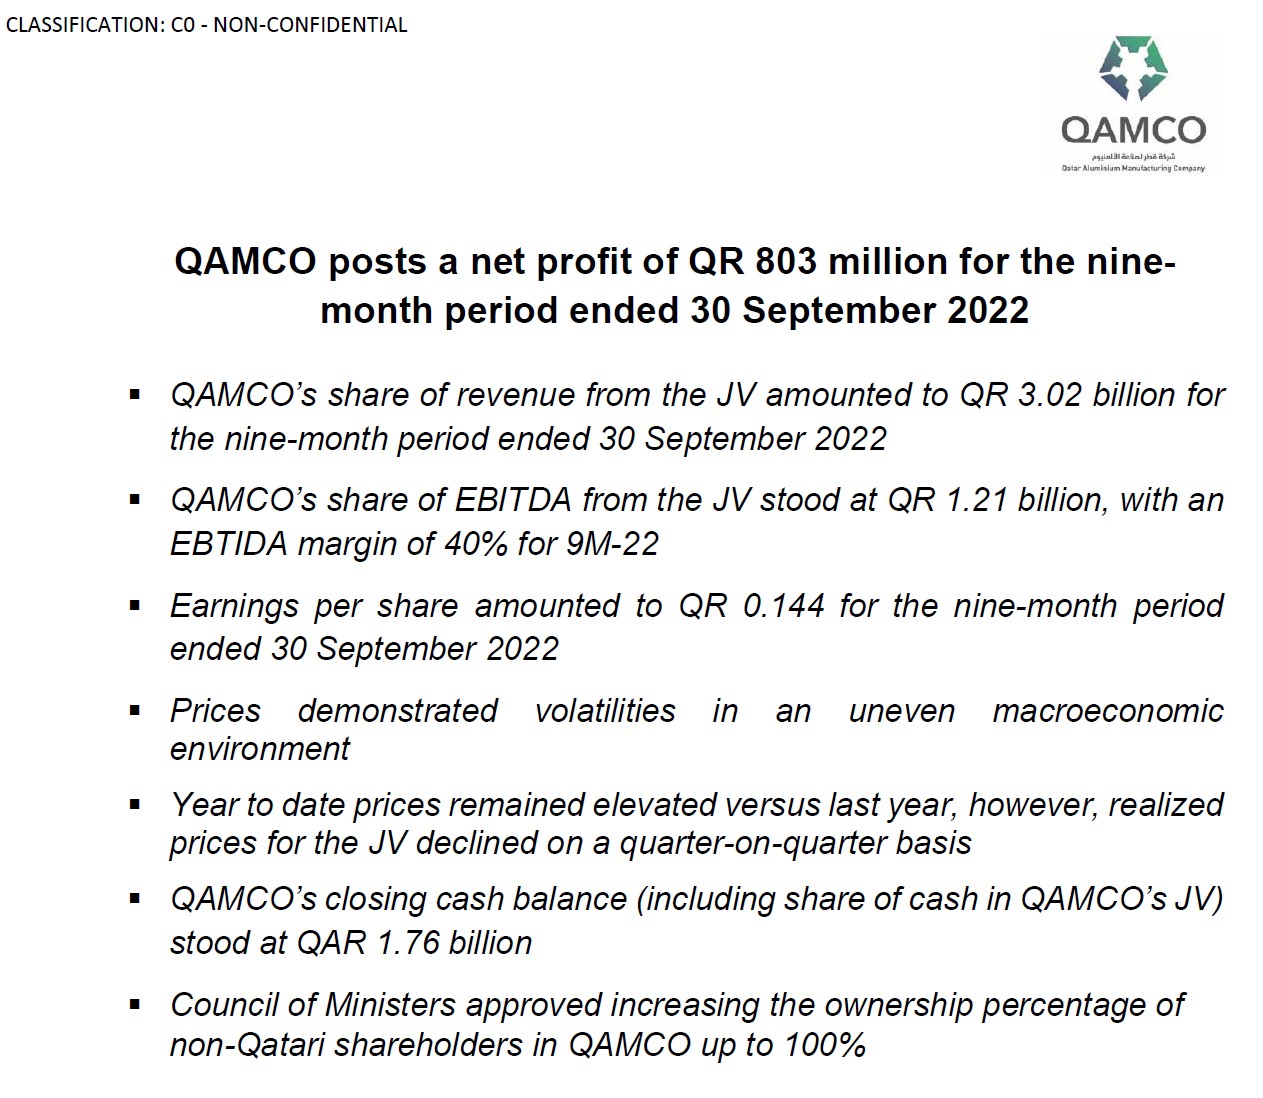 QAMCO posts a net profit of QR 803 million for the nine-month period ended 30 September 2022 